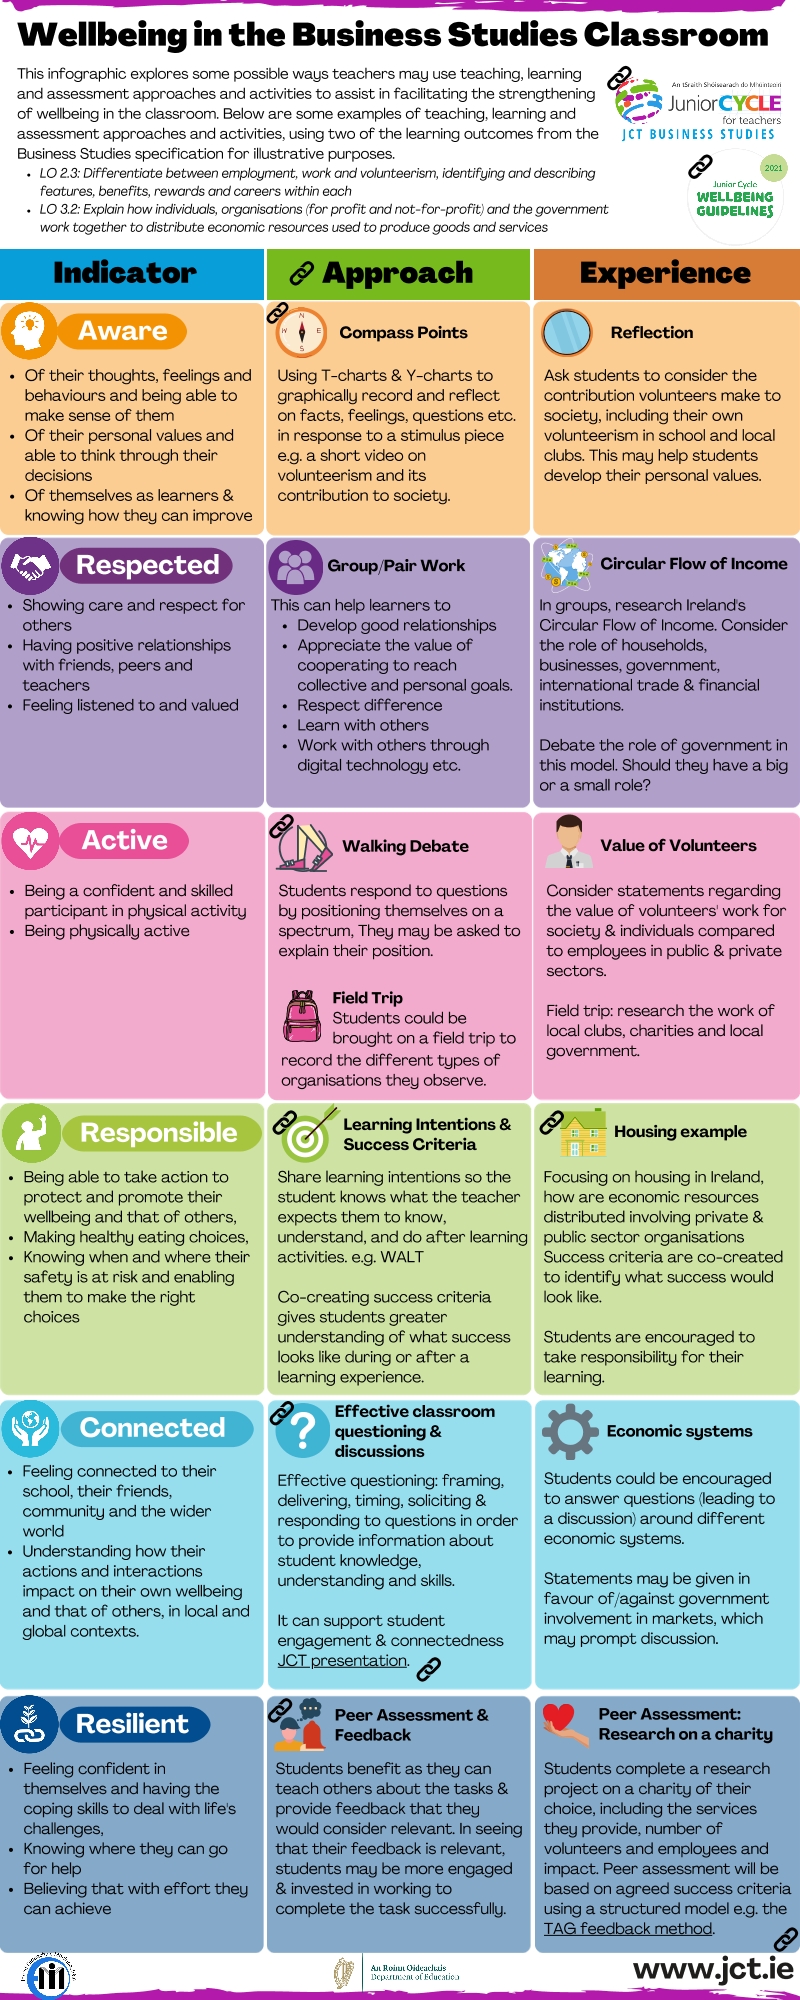 Business Studies & Student Wellbeing Infographic